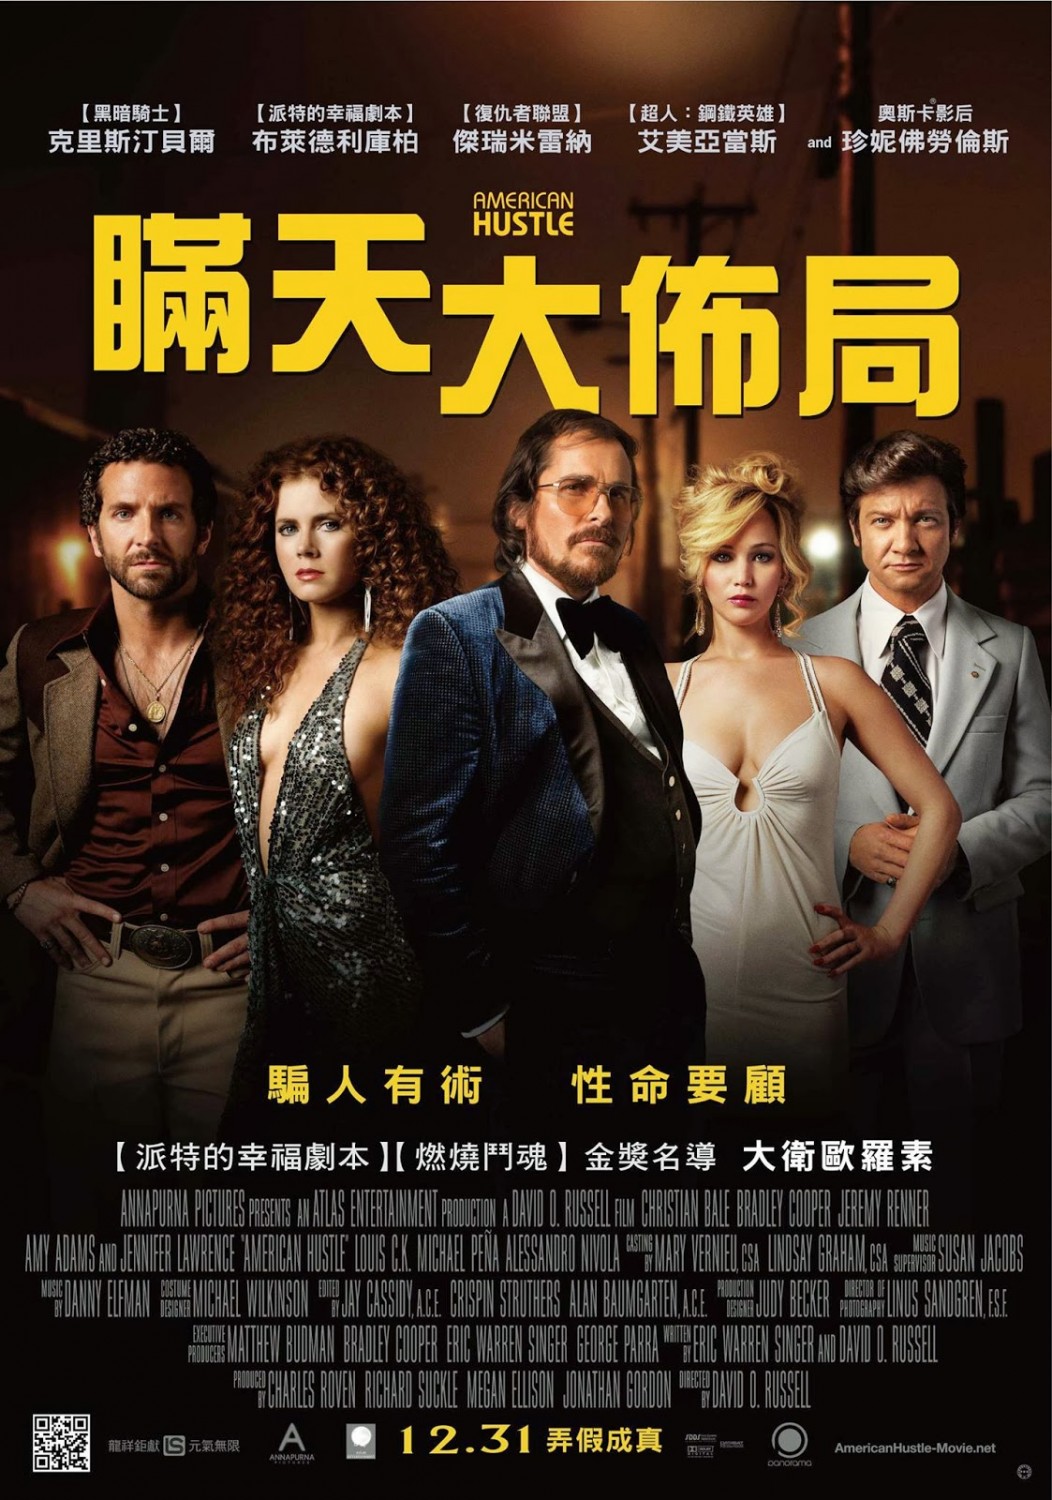 Extra Large Movie Poster Image for American Hustle (#7 of 9)